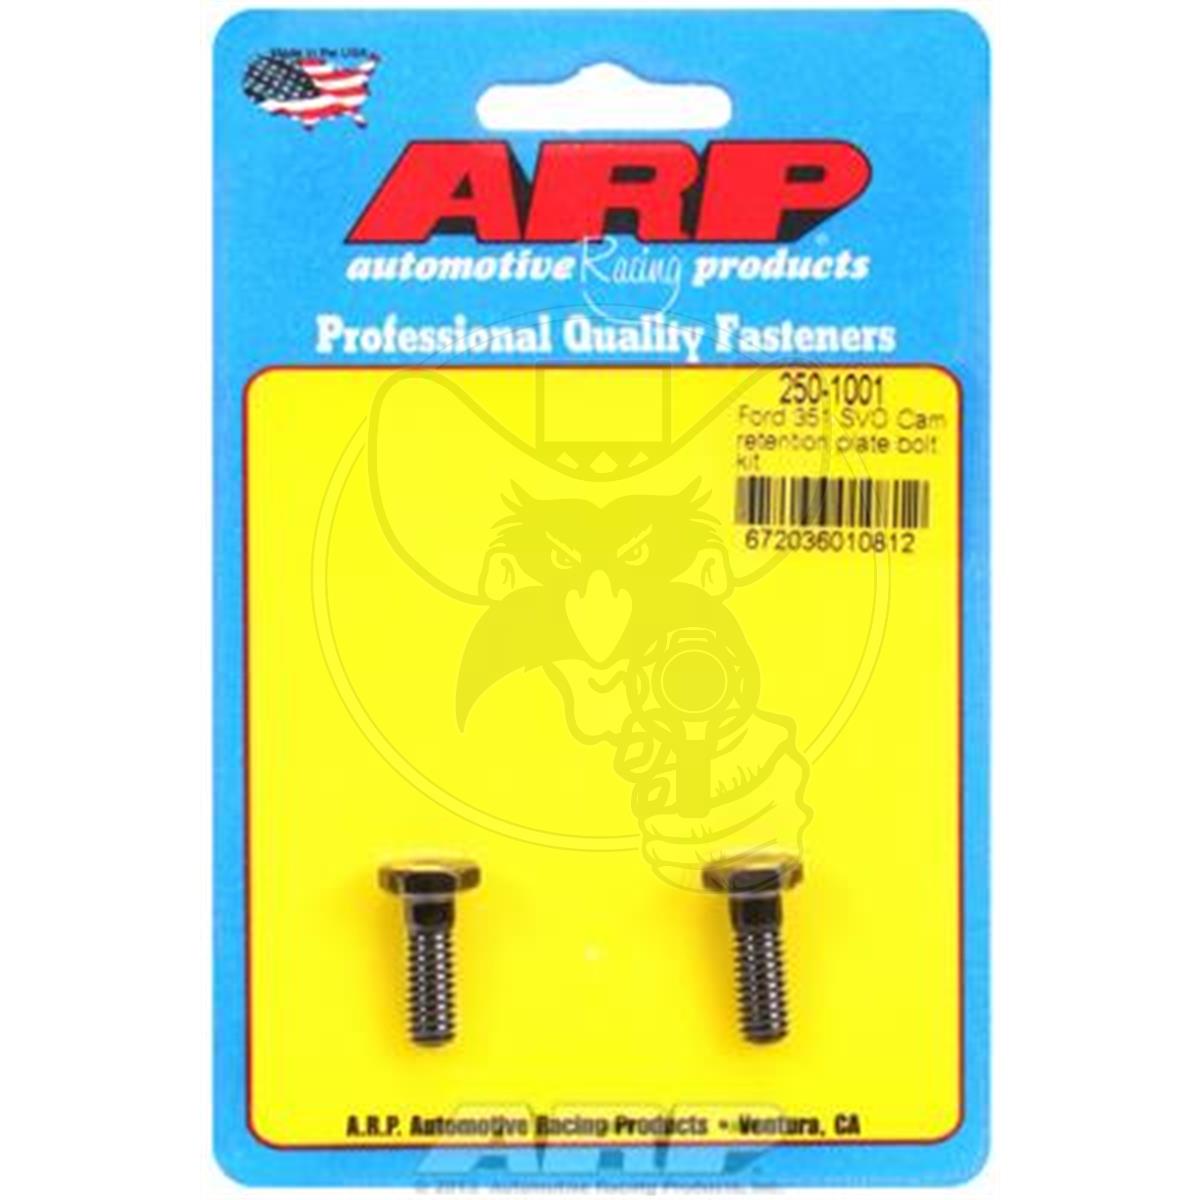 ARP CAM RETAINER PLATE BOLT KIT FITS SMALL BLOCK FORD 351 SVO